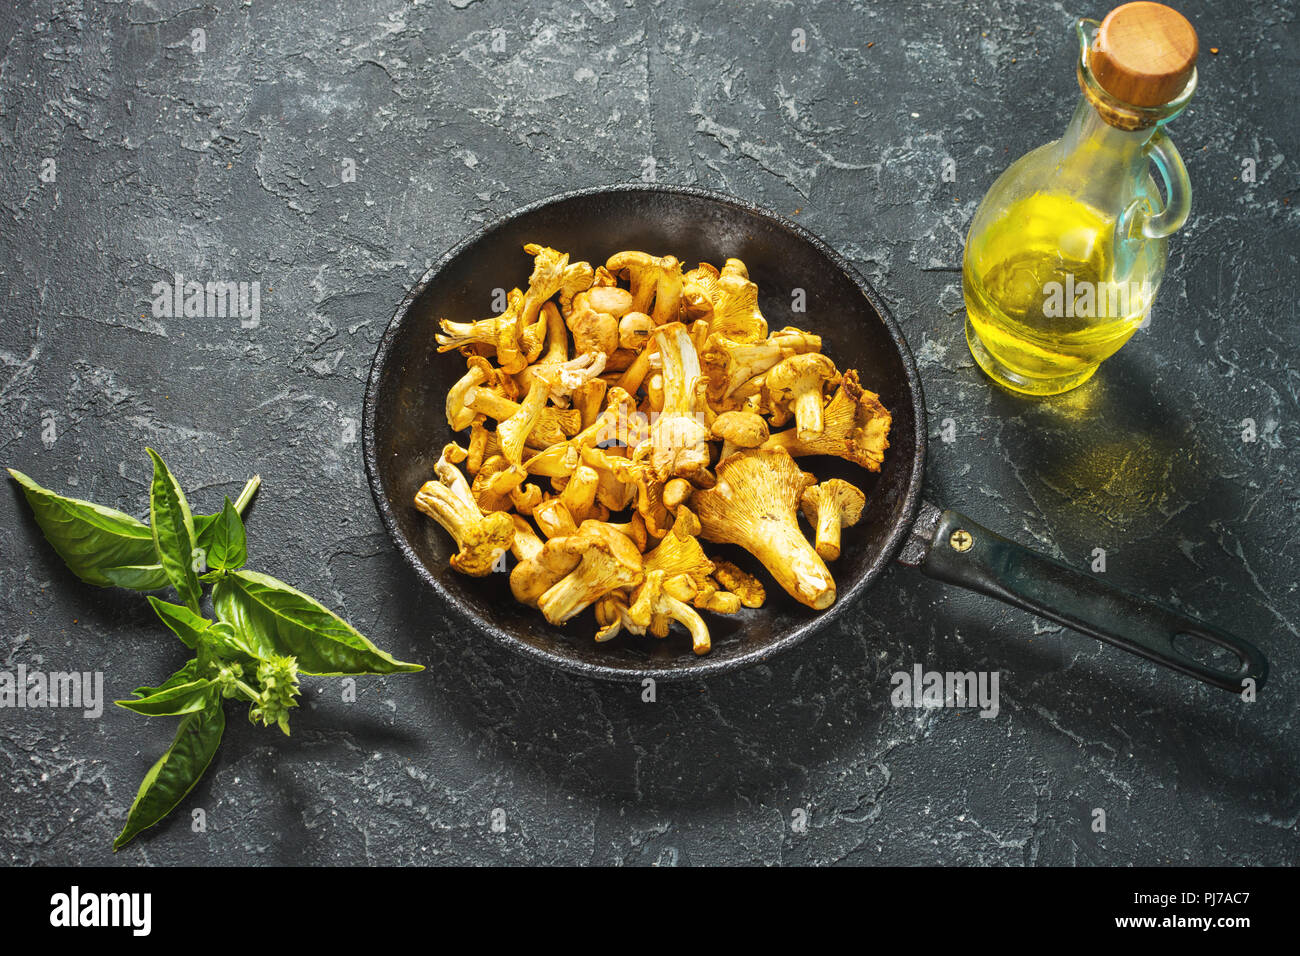 Fresh chanterelle mushrooms in a pan on a black stone table. Stock Photo